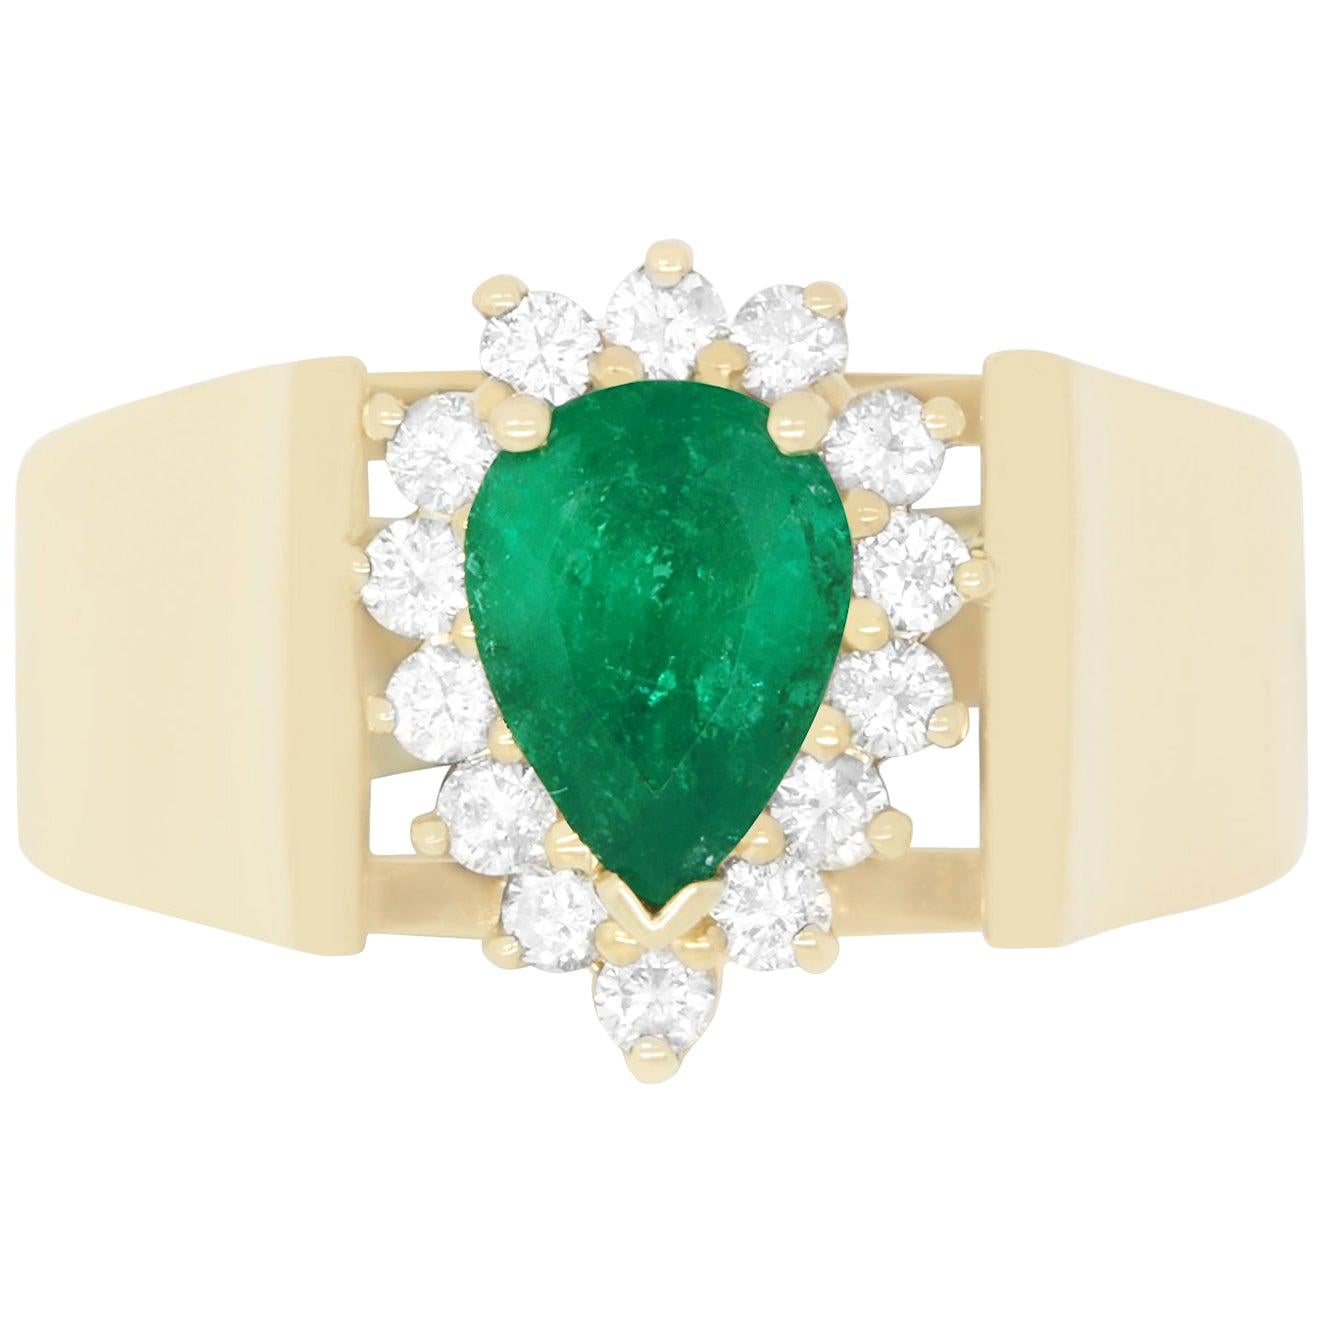 0.80 Carat Pear Shaped Emerald and 0.26 Carat White Diamond Ring